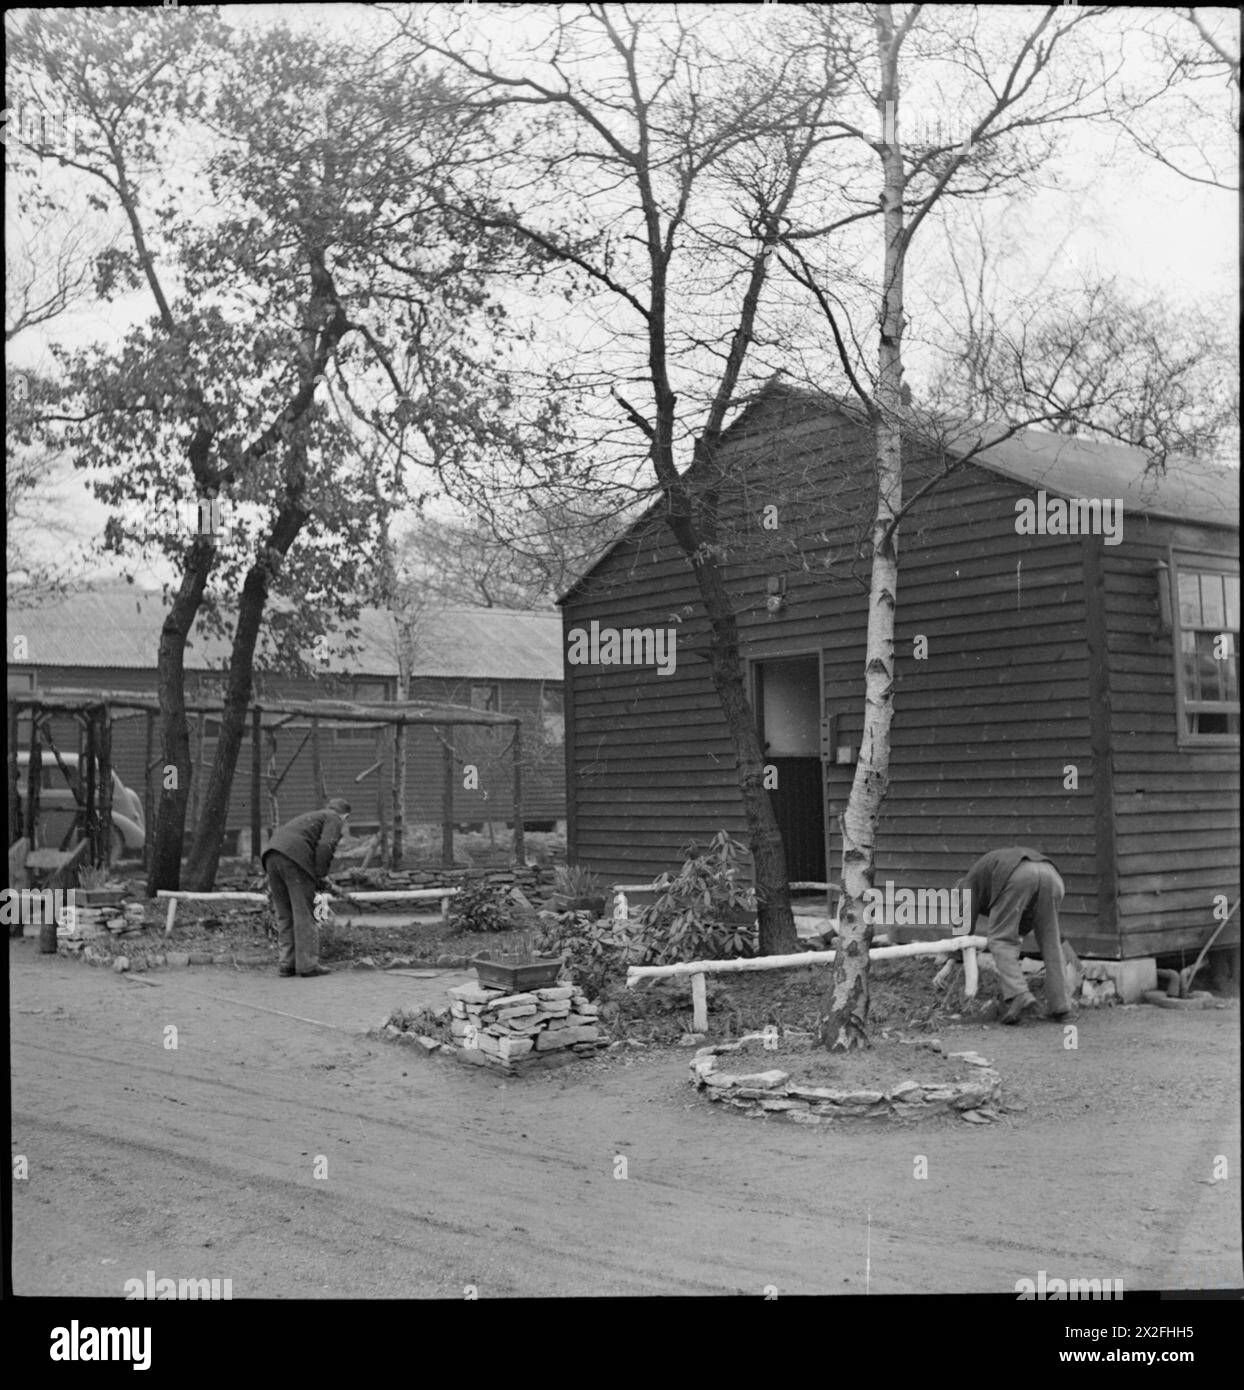 WAKEFIELD TRAINING PRISON AND CAMP: EVERYDAY LIFE IN A BRITISH PRISON, WAKEFIELD, YORKSHIRE, ENGLAND, 1944 - In their spare time, inmates at Wakefield Training Prison tend the gardens they have created outside their huts Stock Photo